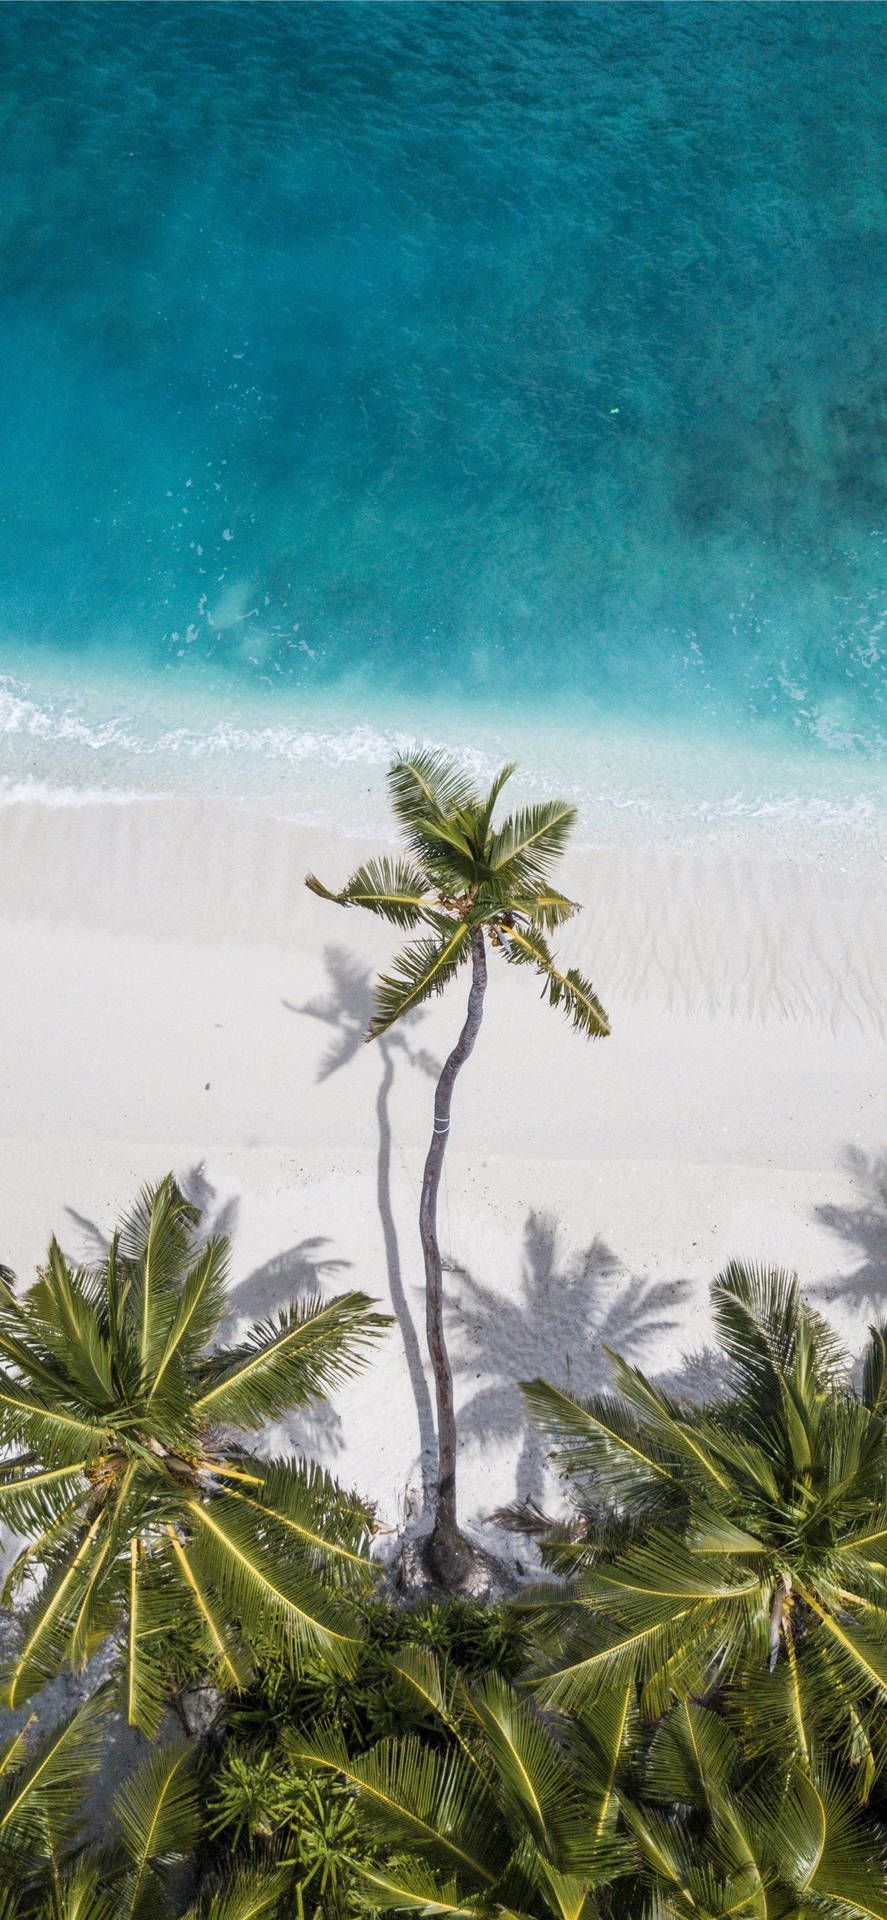 Palm trees on a white sand beach with blue water - Coconut